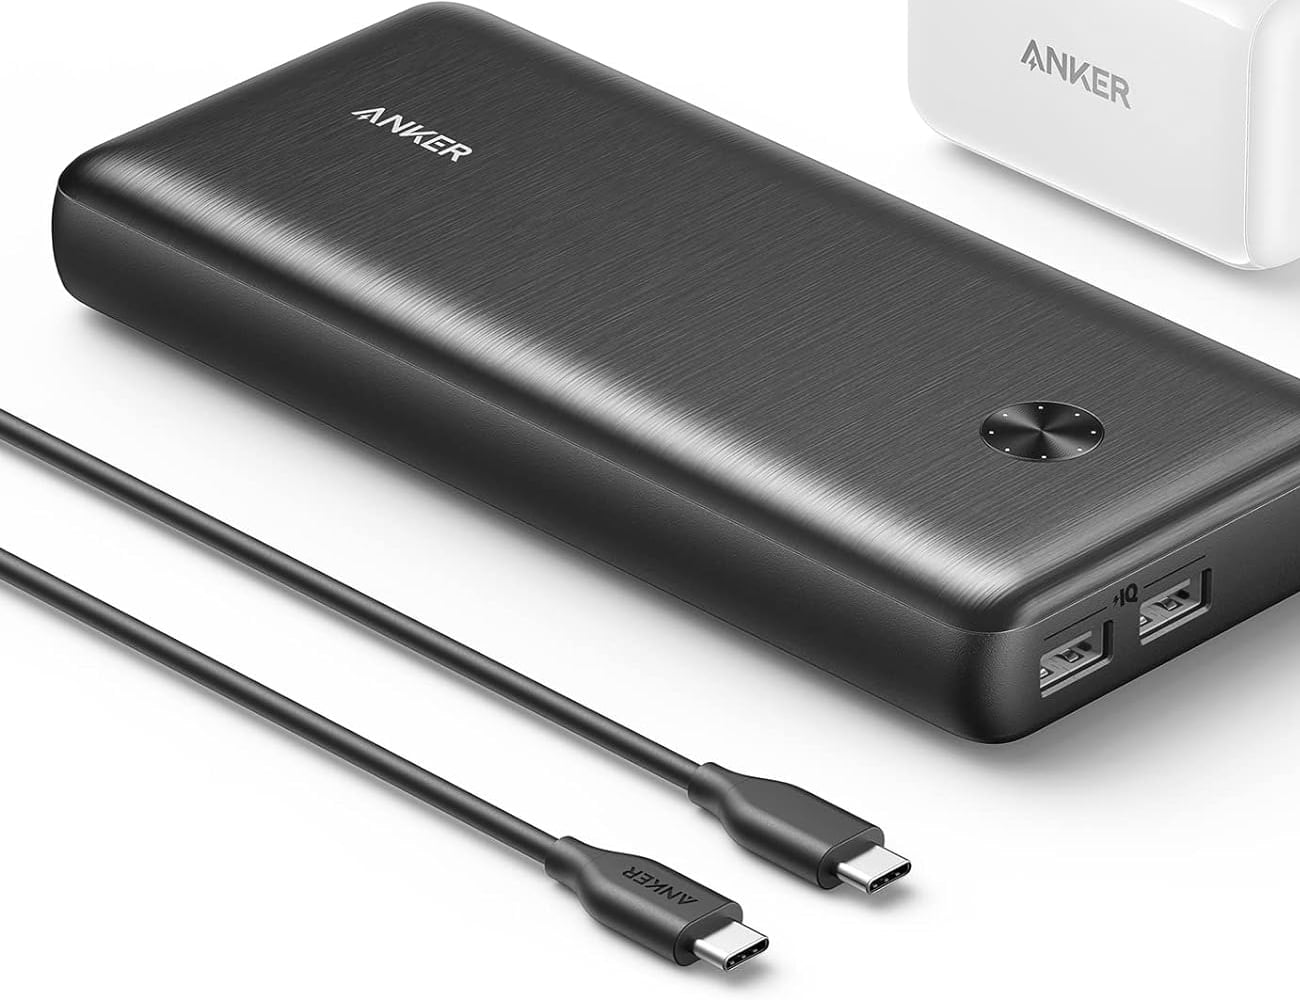 Anker Power Bank and USB wire